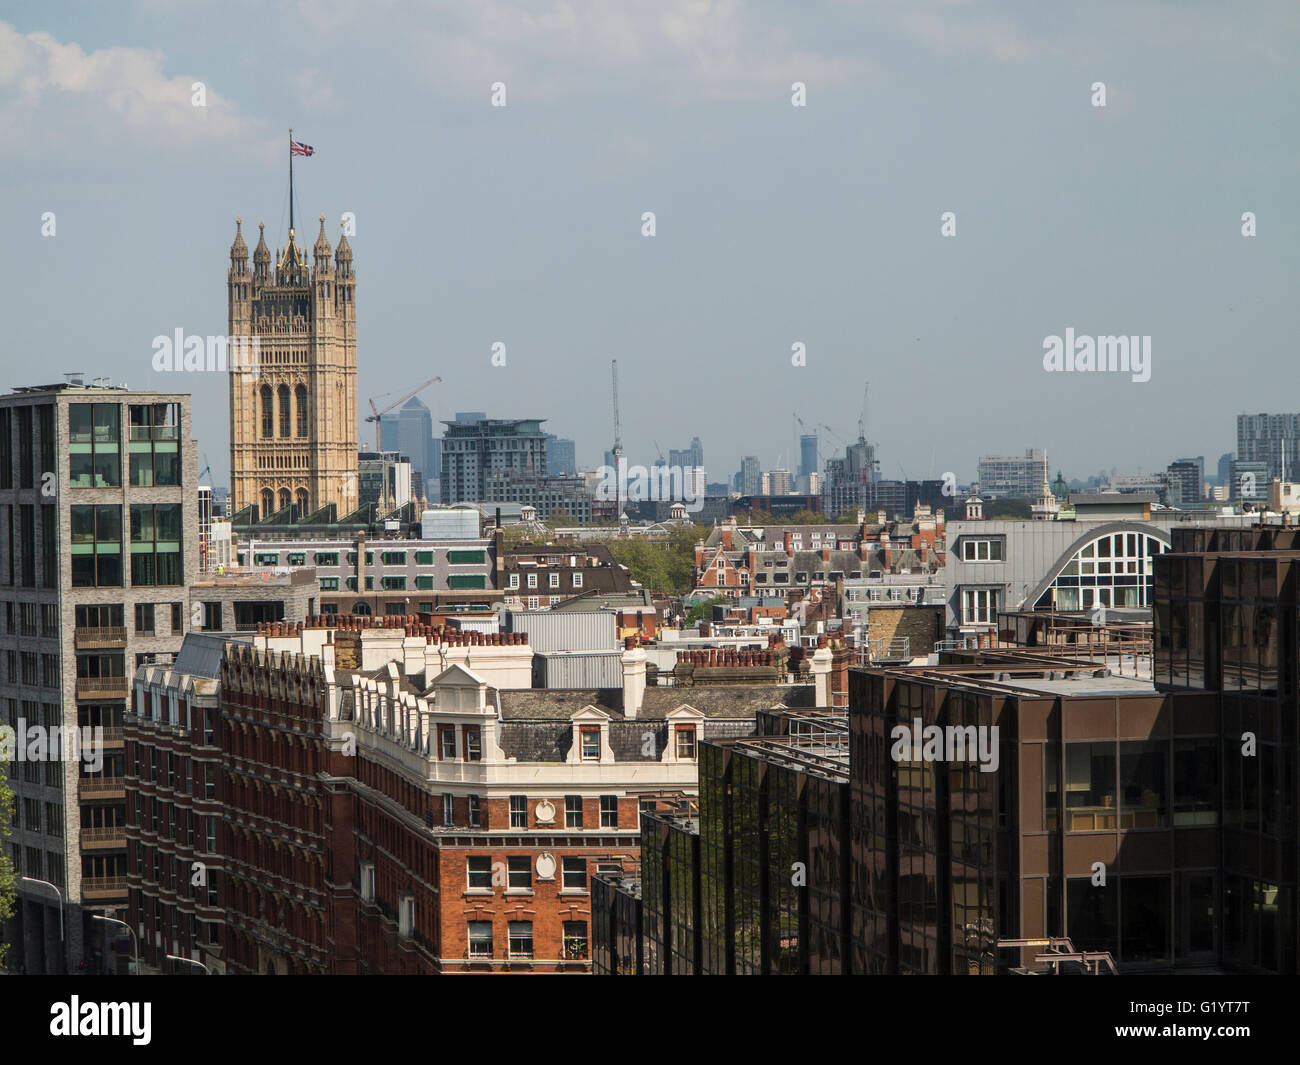 Victoria Tower and surrounding buildings Stock Photo